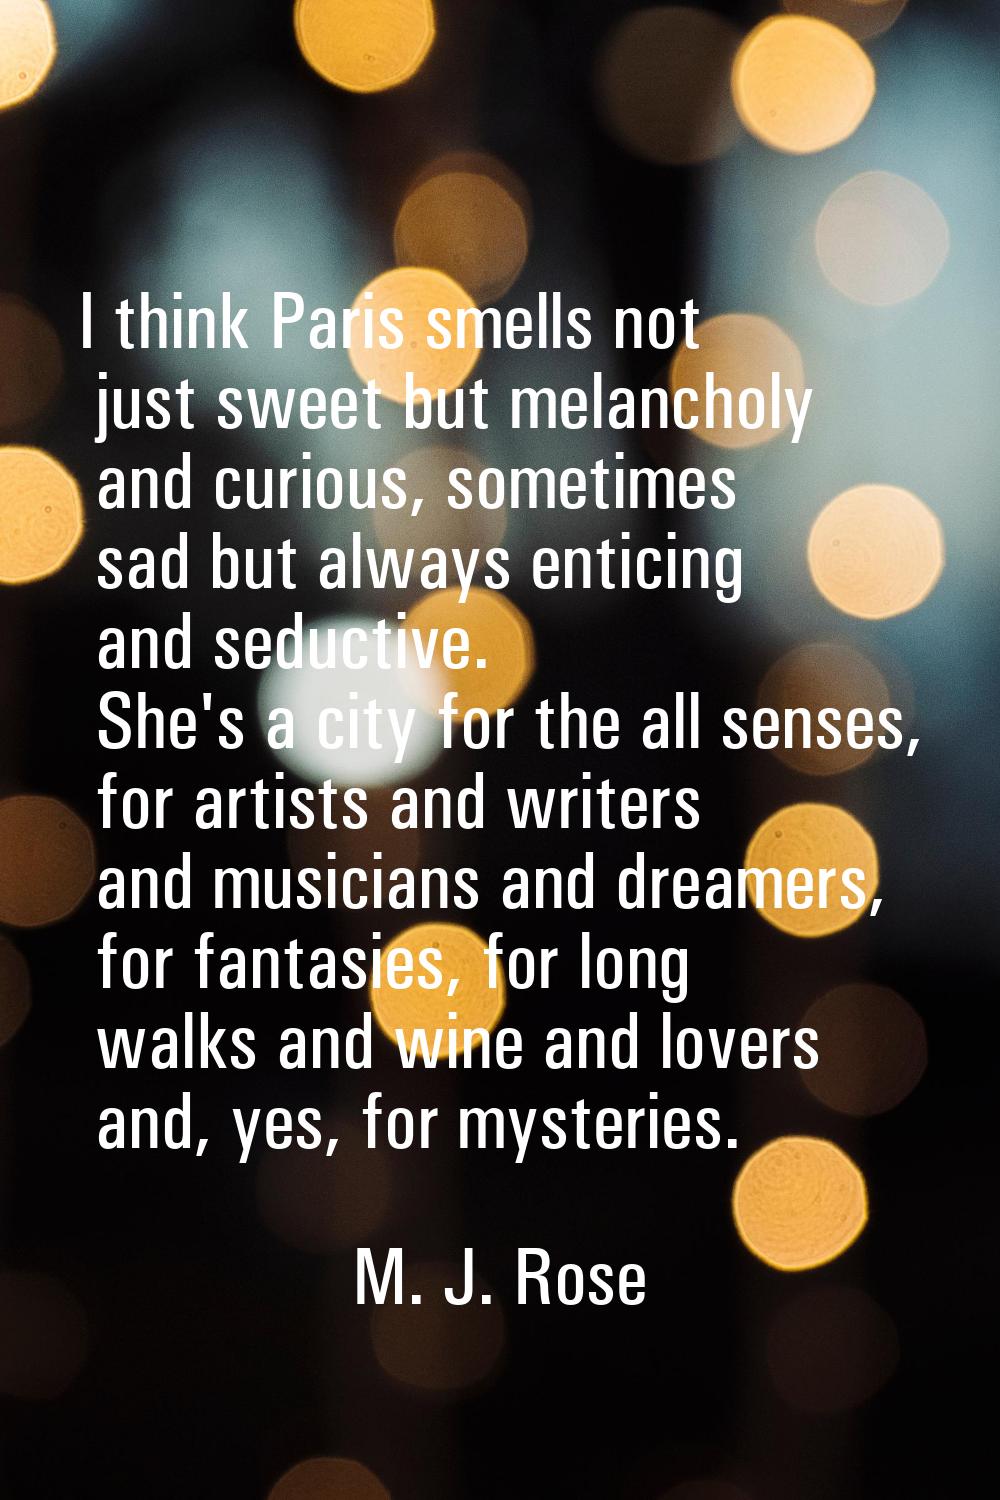 I think Paris smells not just sweet but melancholy and curious, sometimes sad but always enticing a